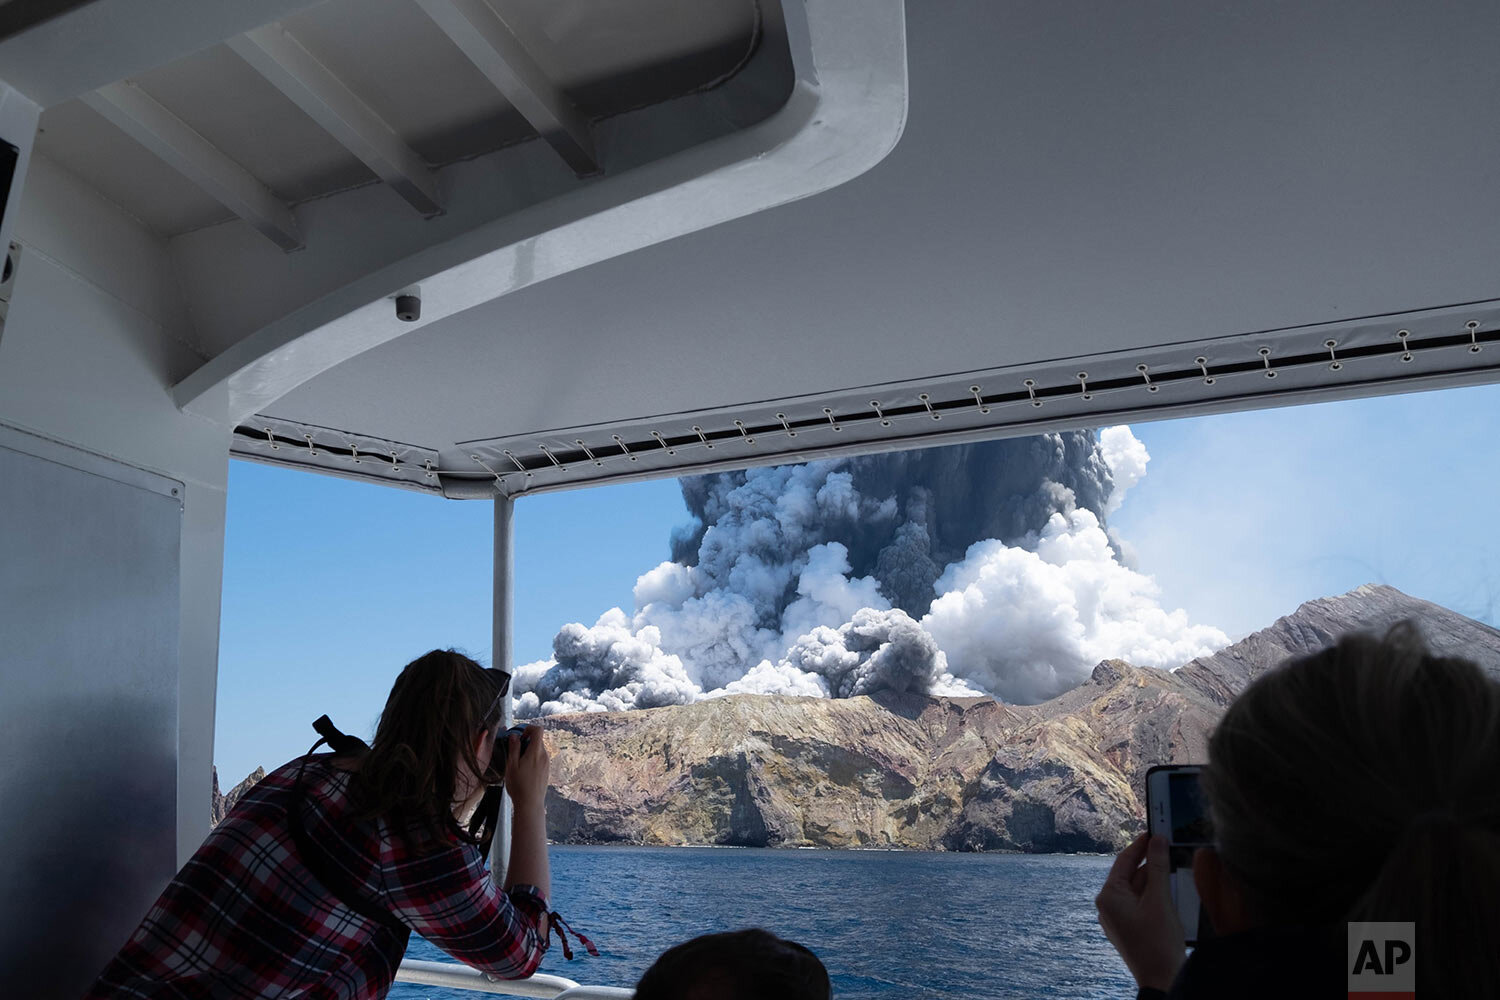  In this photo provided by Michael Schade, tourists on a boat look at the eruption of the volcano on White Island, New Zealand on Monday, Dec. 9, 2019. (Michael Schade via AP) 